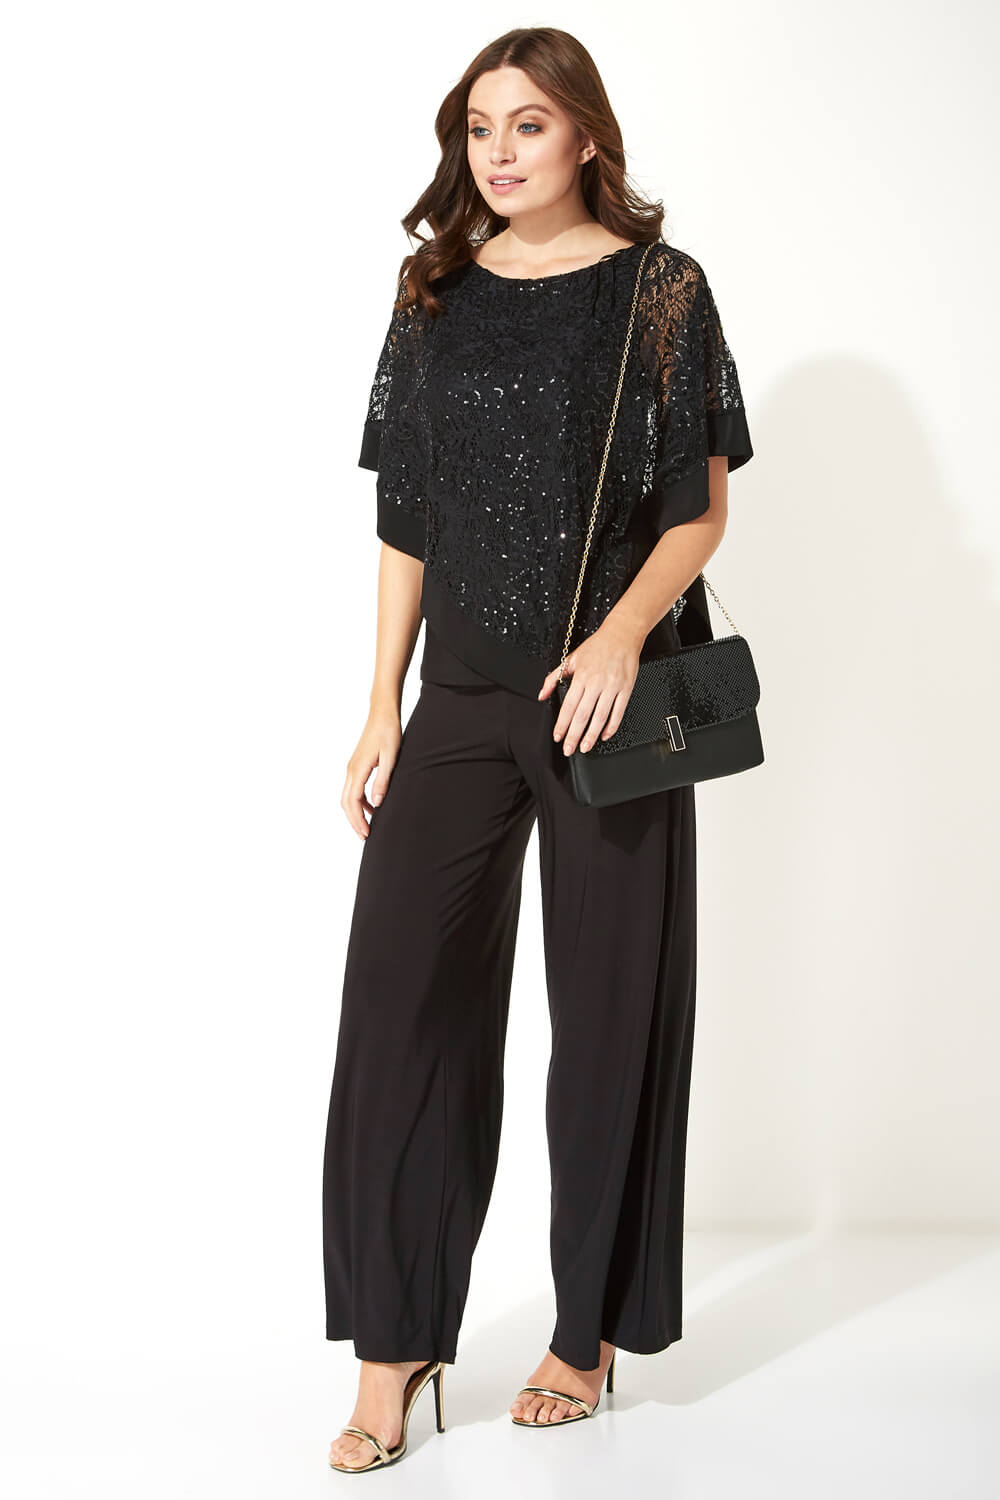 Black Sequin Lace Overlay Top, Image 4 of 4